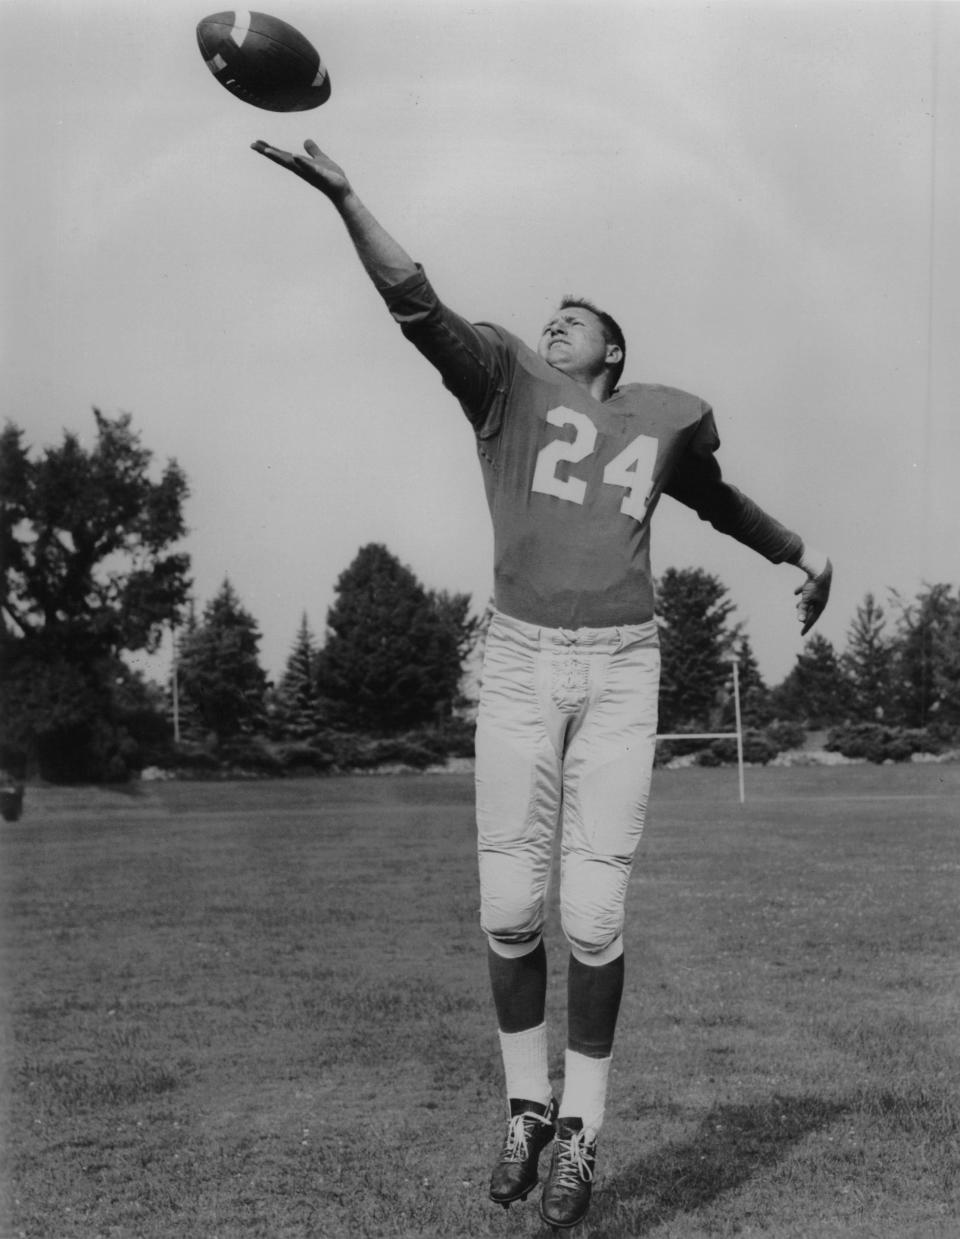 Jack Leroy Christiansen was a football player and coach who put together an eight-year Hall of Fame playing career with Detroit Lions in the National Football League in the 1950s.